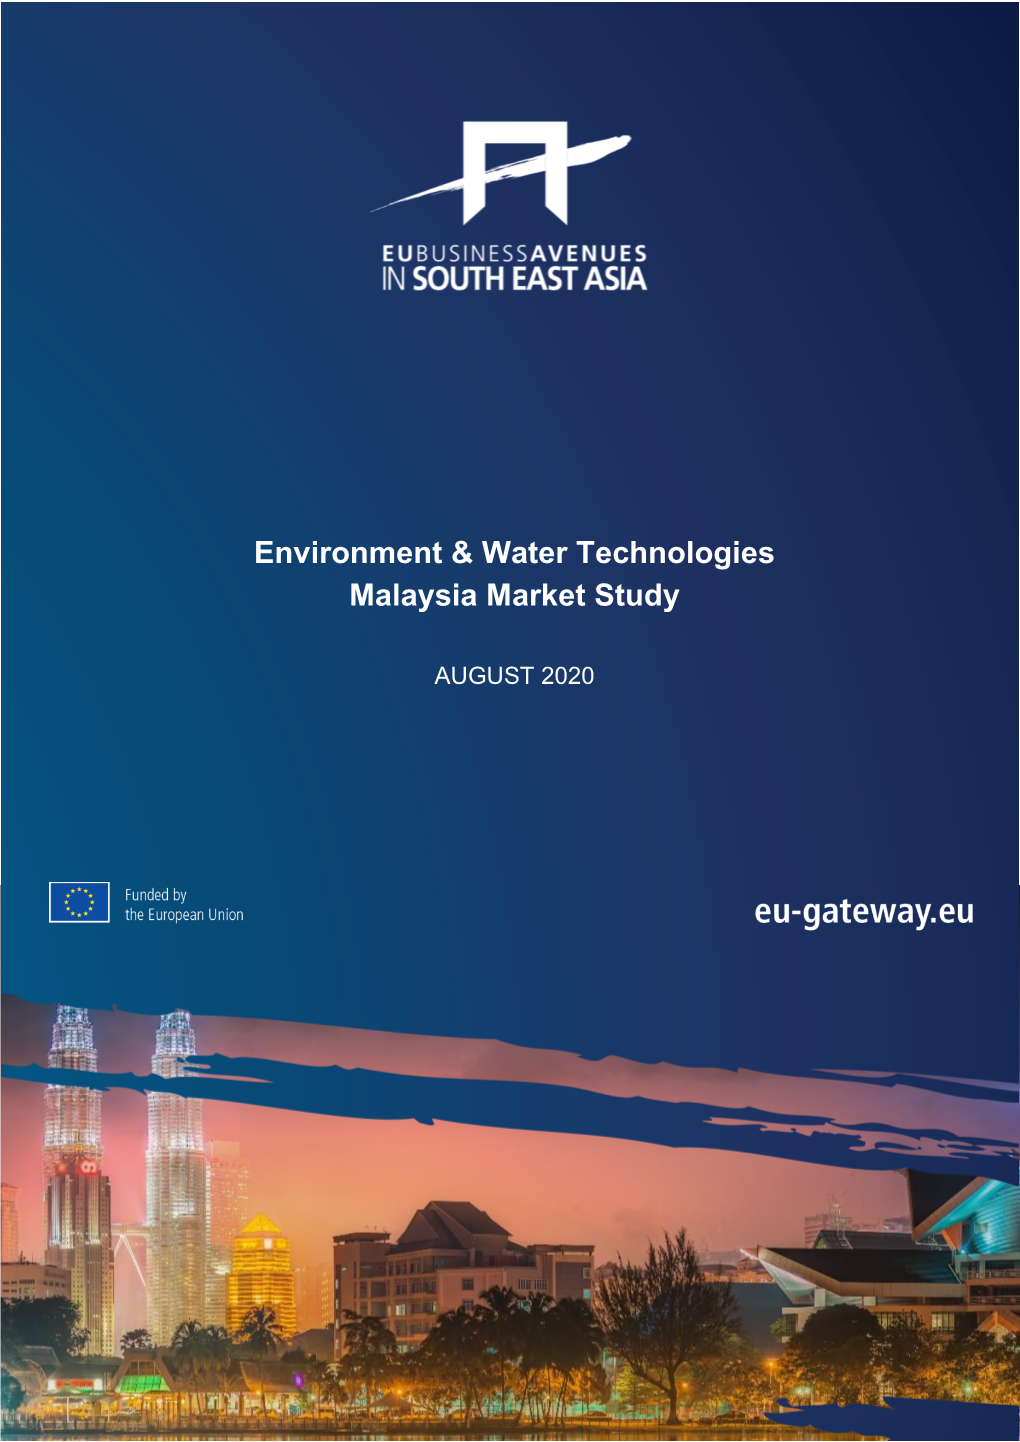 Environment & Water Technologies Sector (Malaysia Market Study)